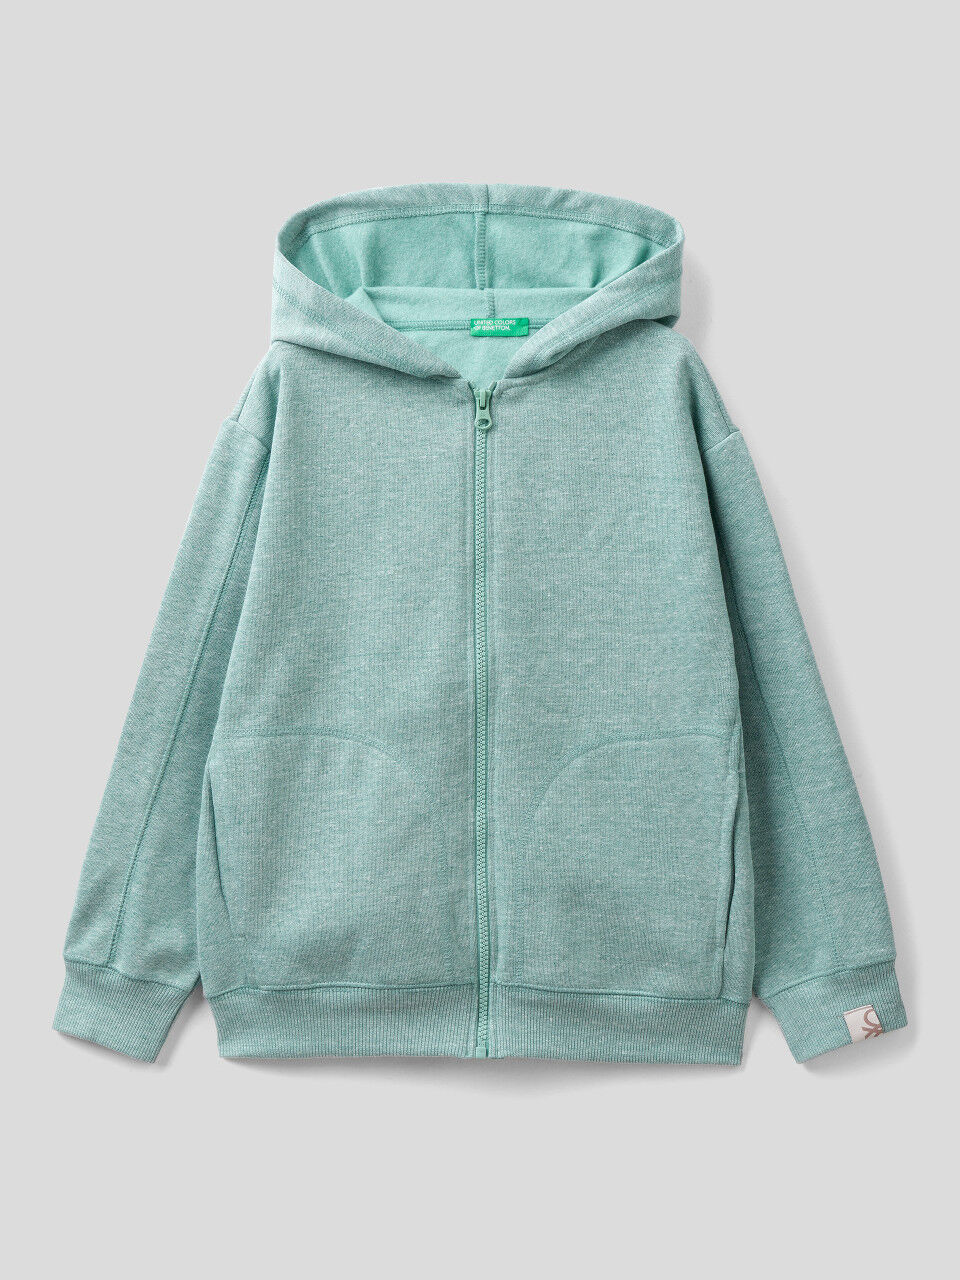 Hoodie in recycled fabric